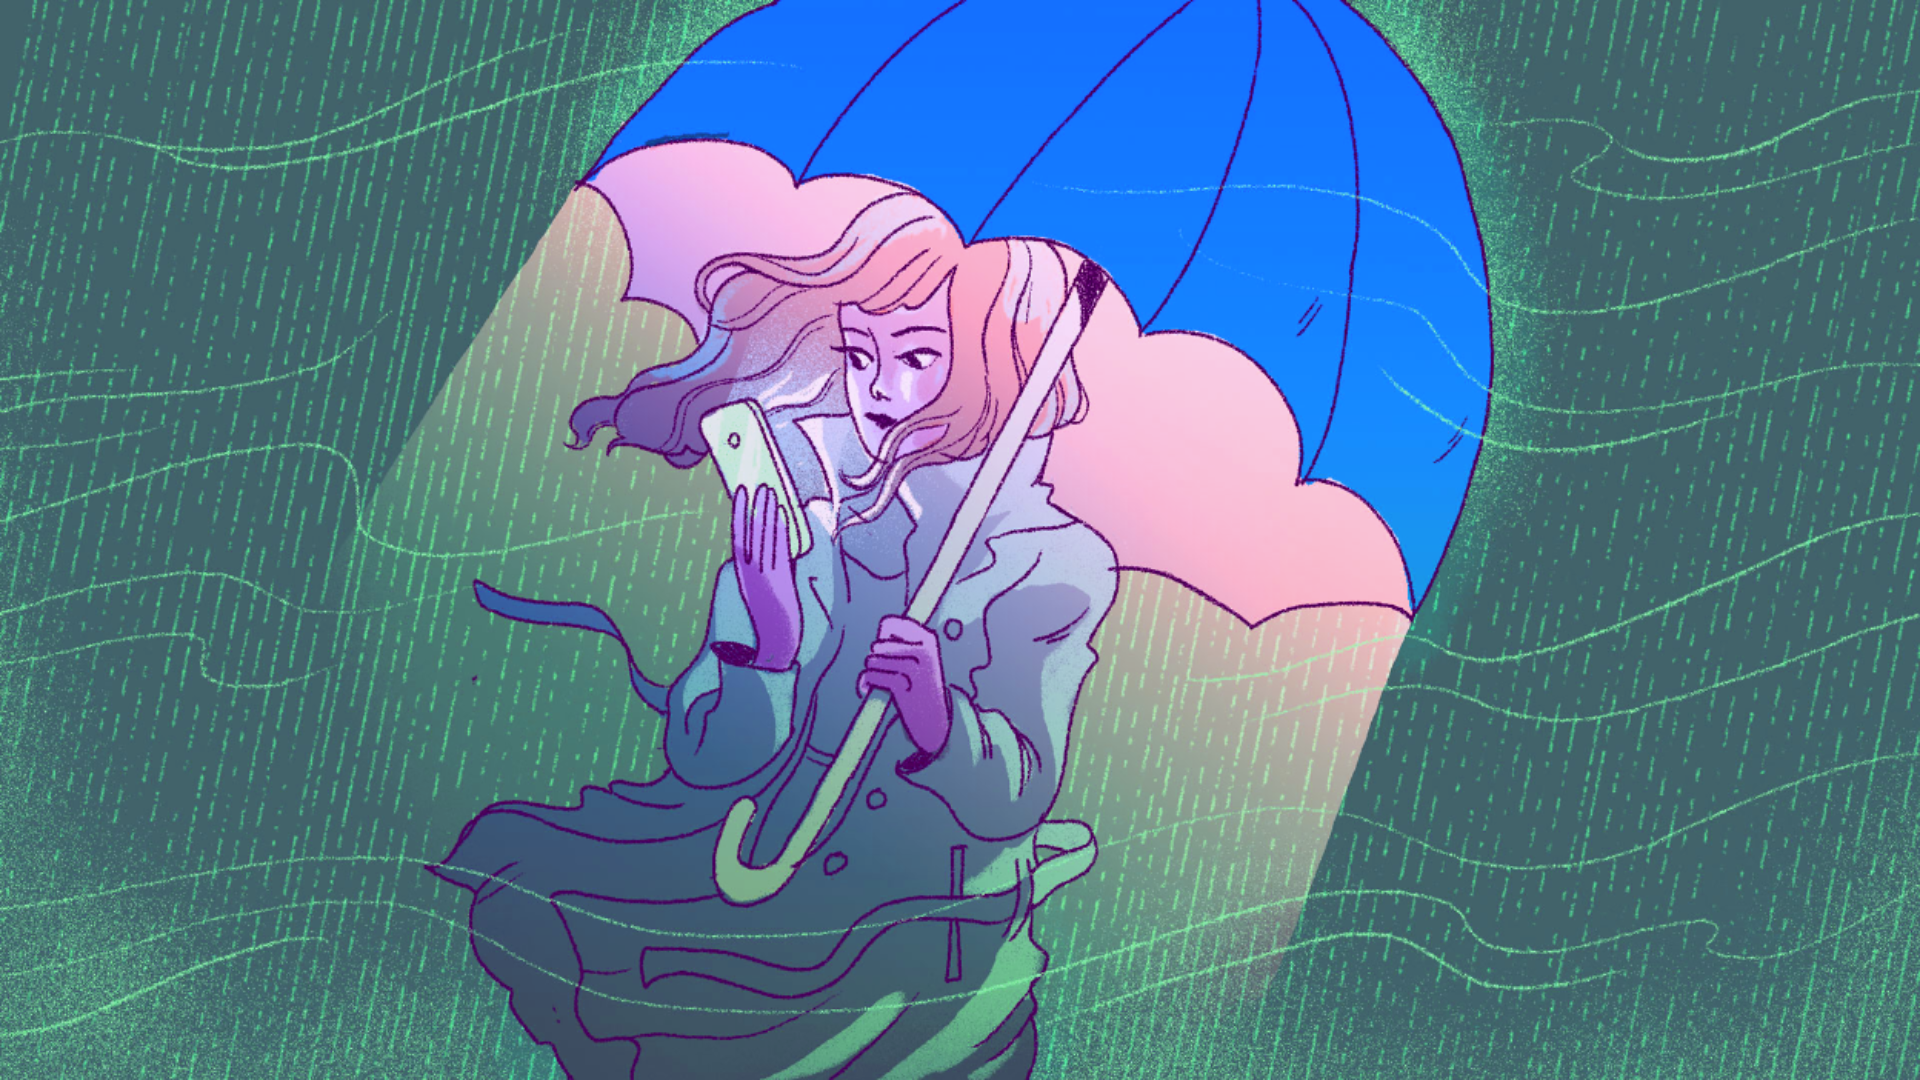 A white girl in a raincoat with shoulder length hair looks at her phone in one hand. In the other she holds a twitter-blue umbrella that is shielding her from rain.